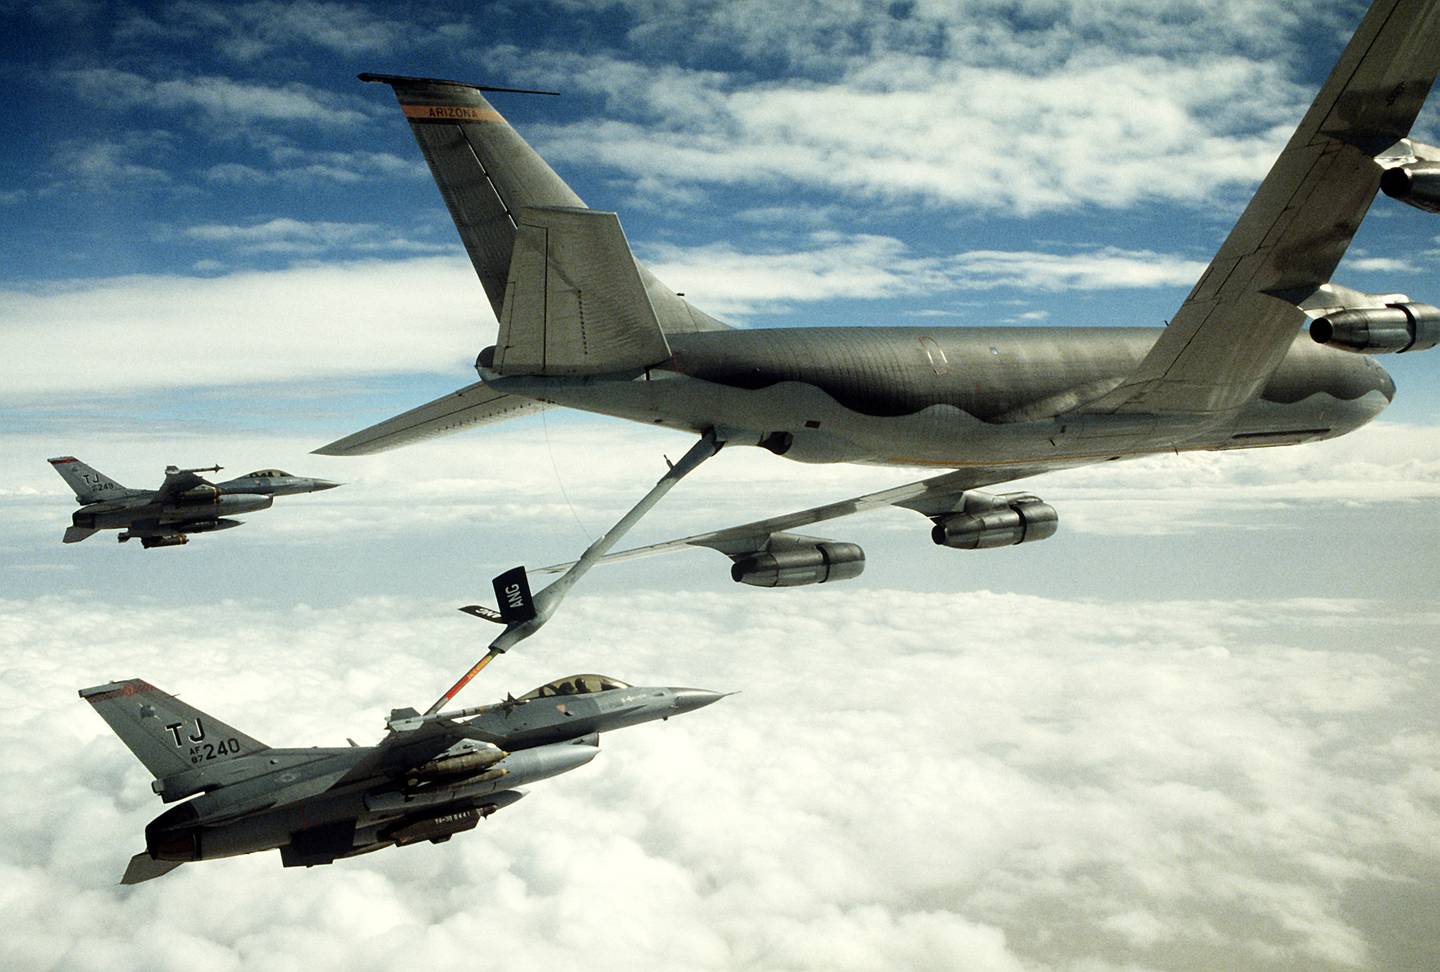 A 401st Tactical Fighter Wing F-16C Fighting Falcon aircraft refuels from a KC-135 Stratotanker aircraft as another F-16 stands by during Operation Desert Storm on Feb. 1, 1991.